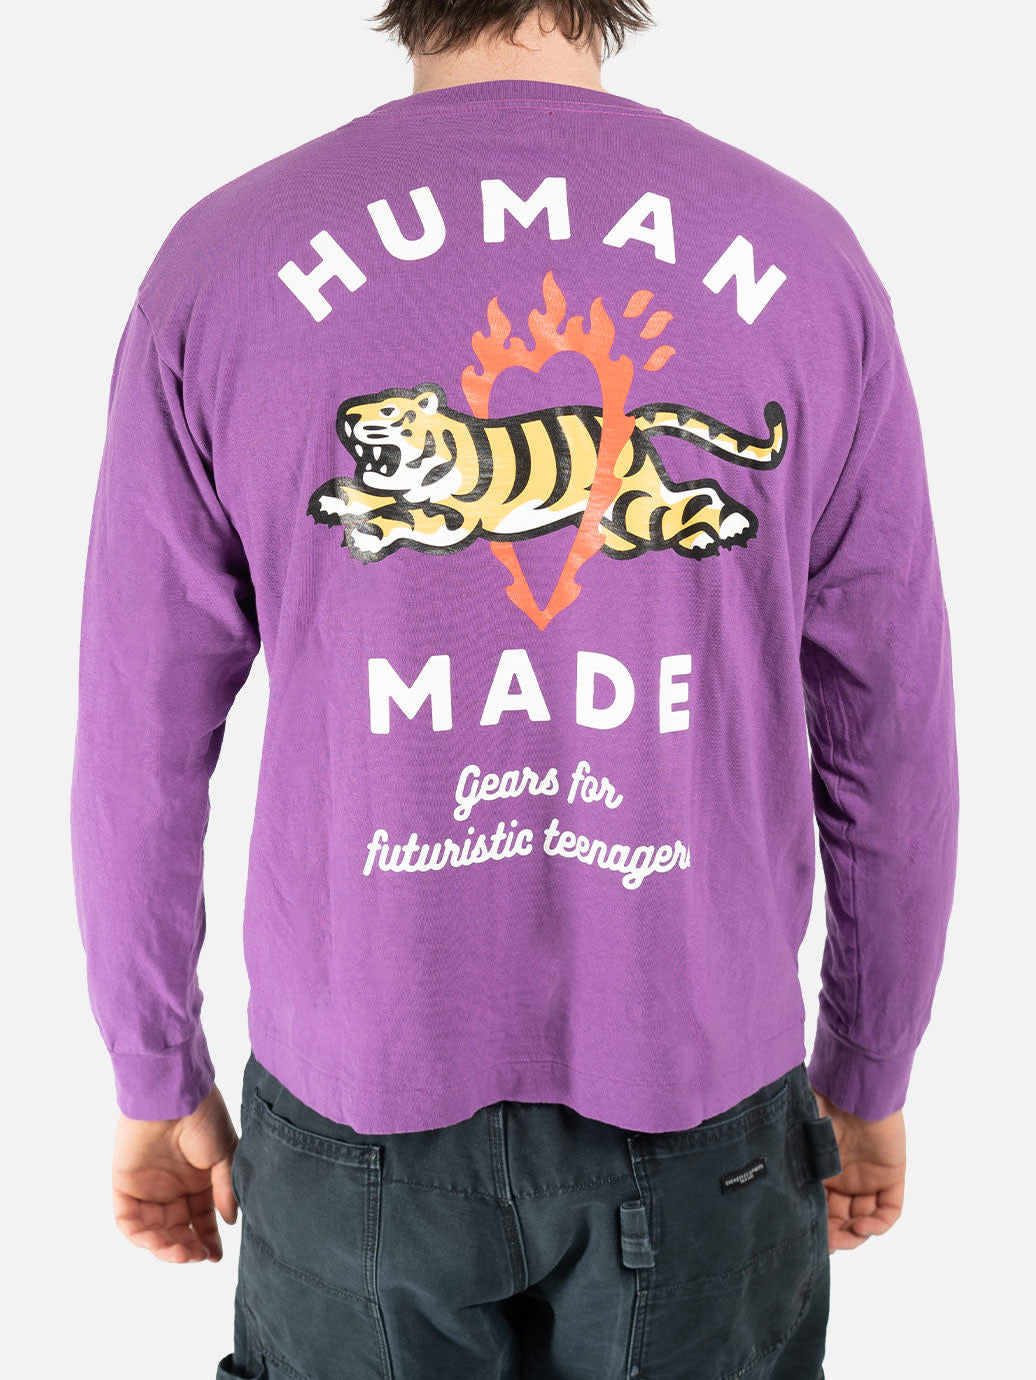 www.haoming.jp - HUMAN MADE Graphic L S T-Shirt #6 